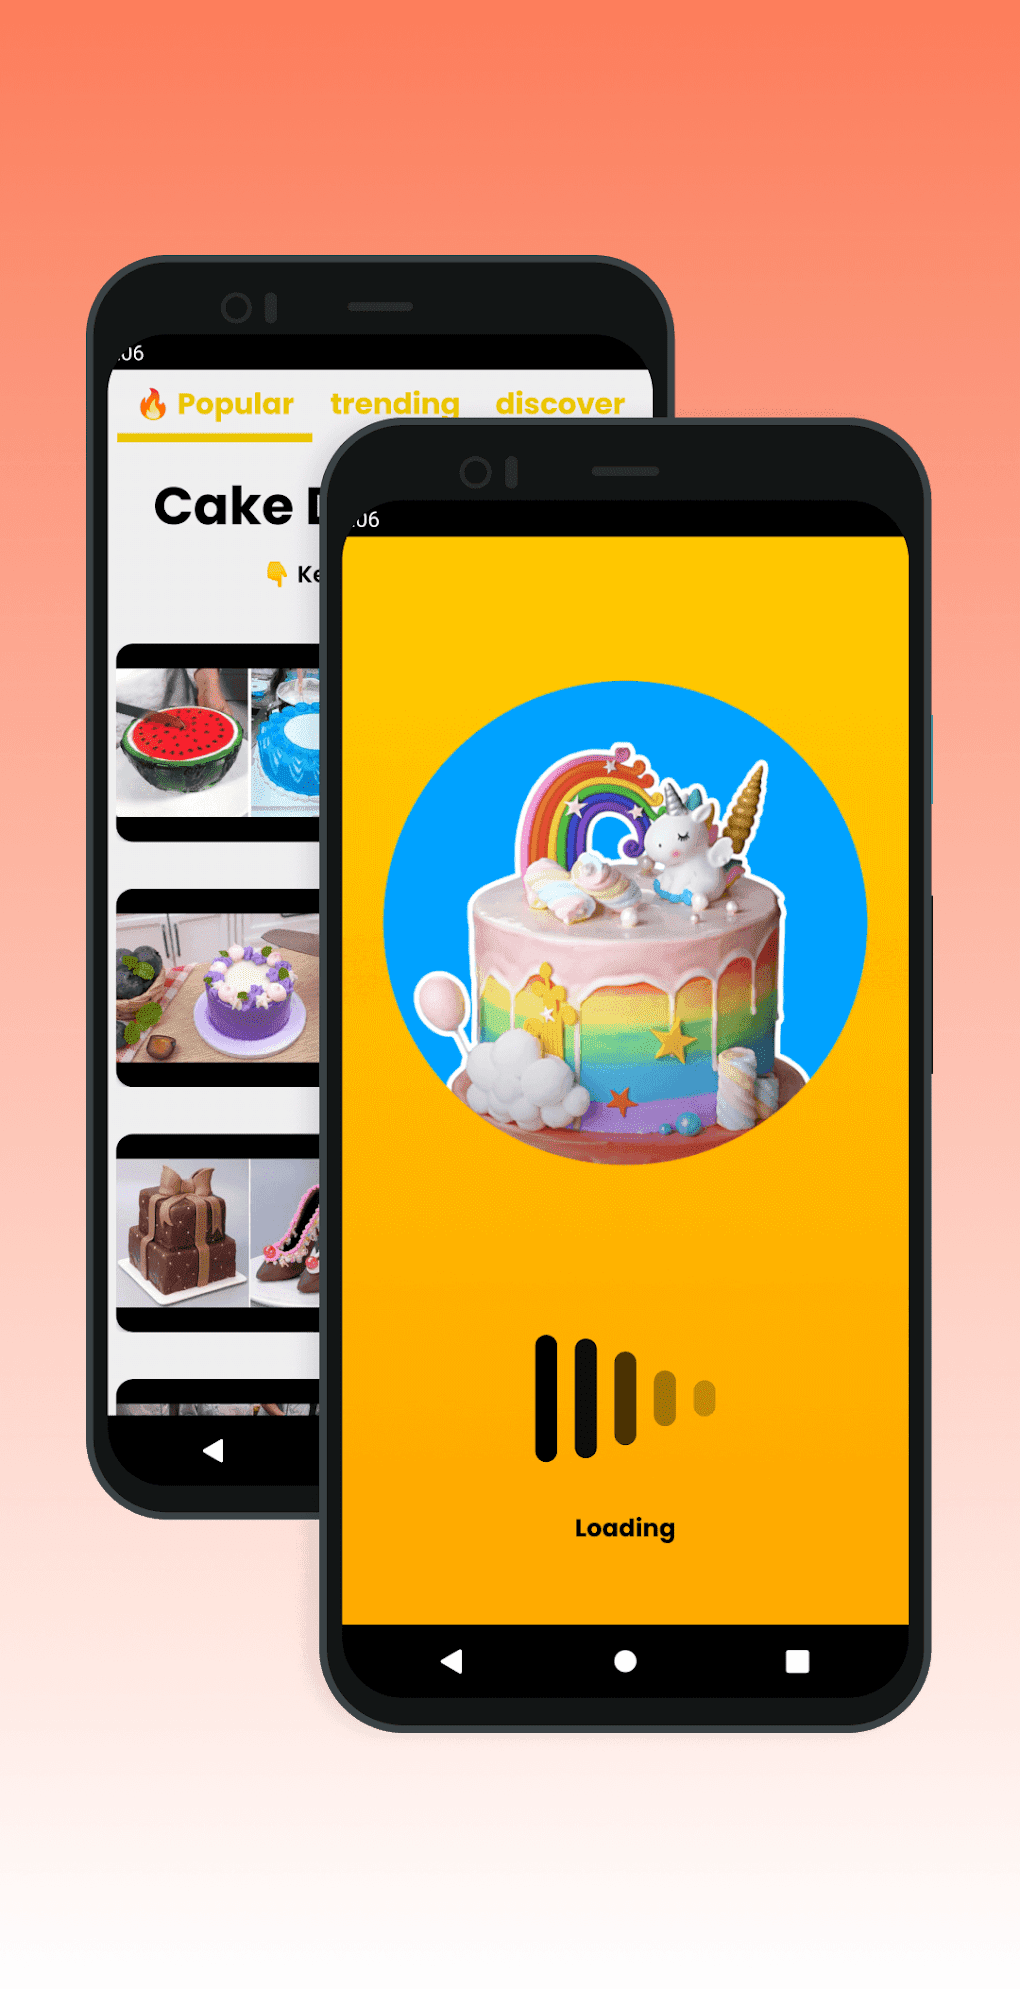 Share 73+ cake delivery app best - awesomeenglish.edu.vn